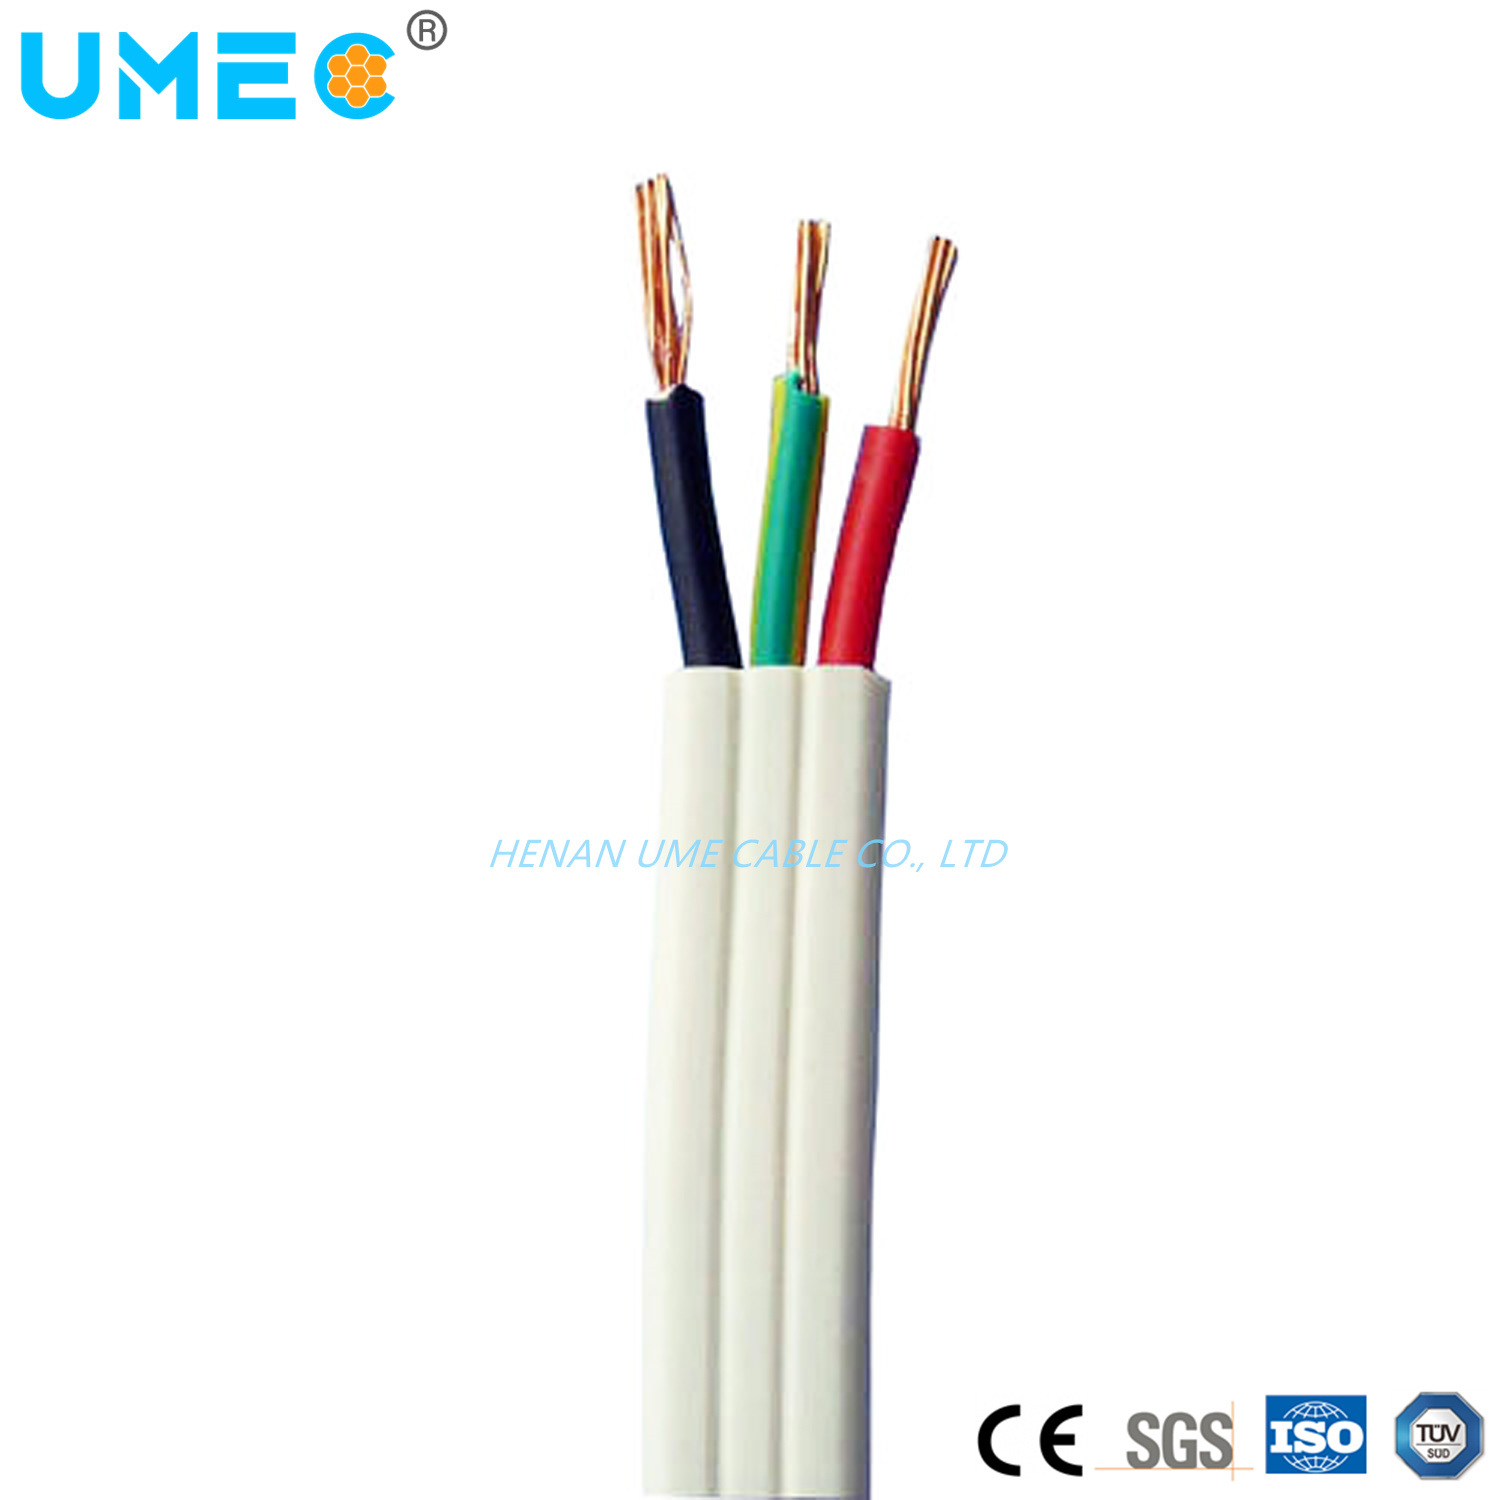 2X2.5+2.5mm2 2X4+2.5mm2 PVC Insulation Copper Conductor TPS Flat Cable